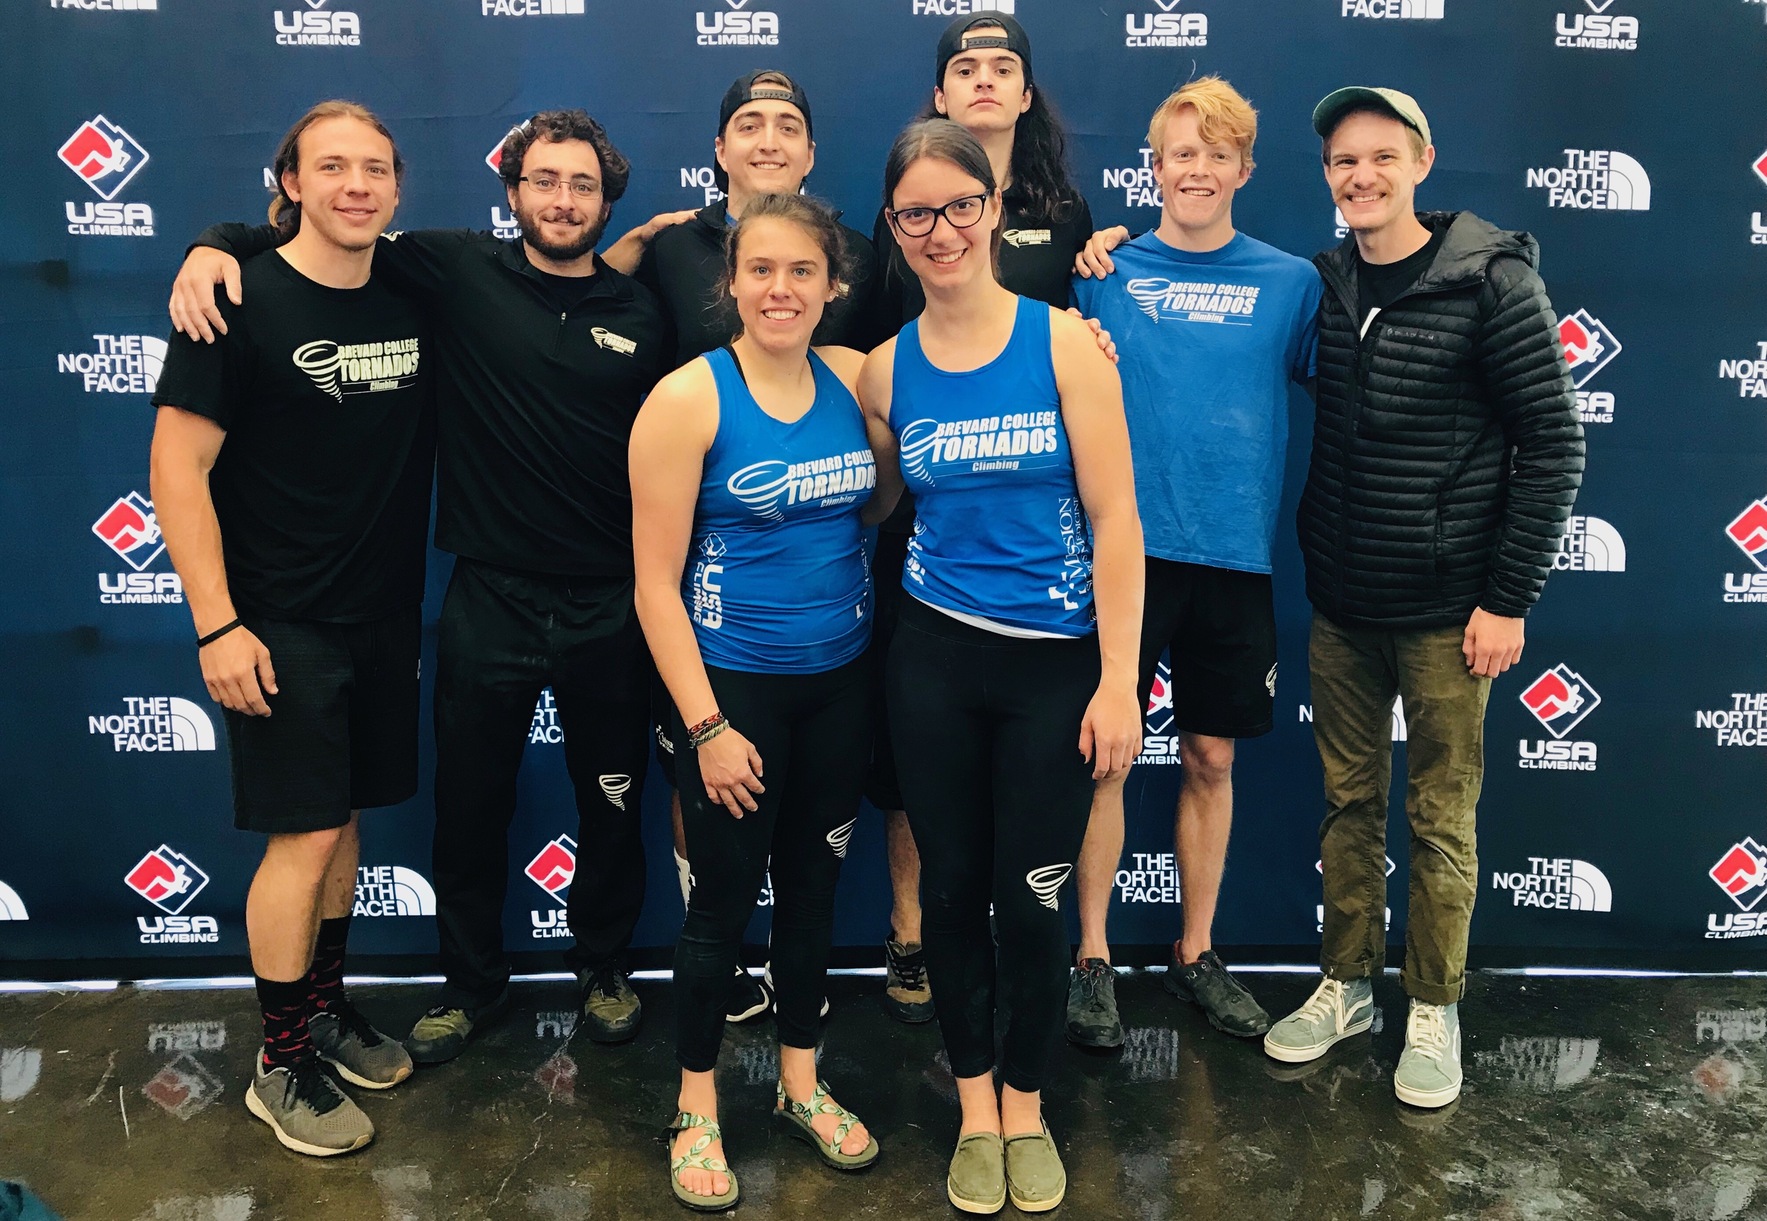 USA Climbing National Championships Culmination of Exciting 2018-19 for Tornados